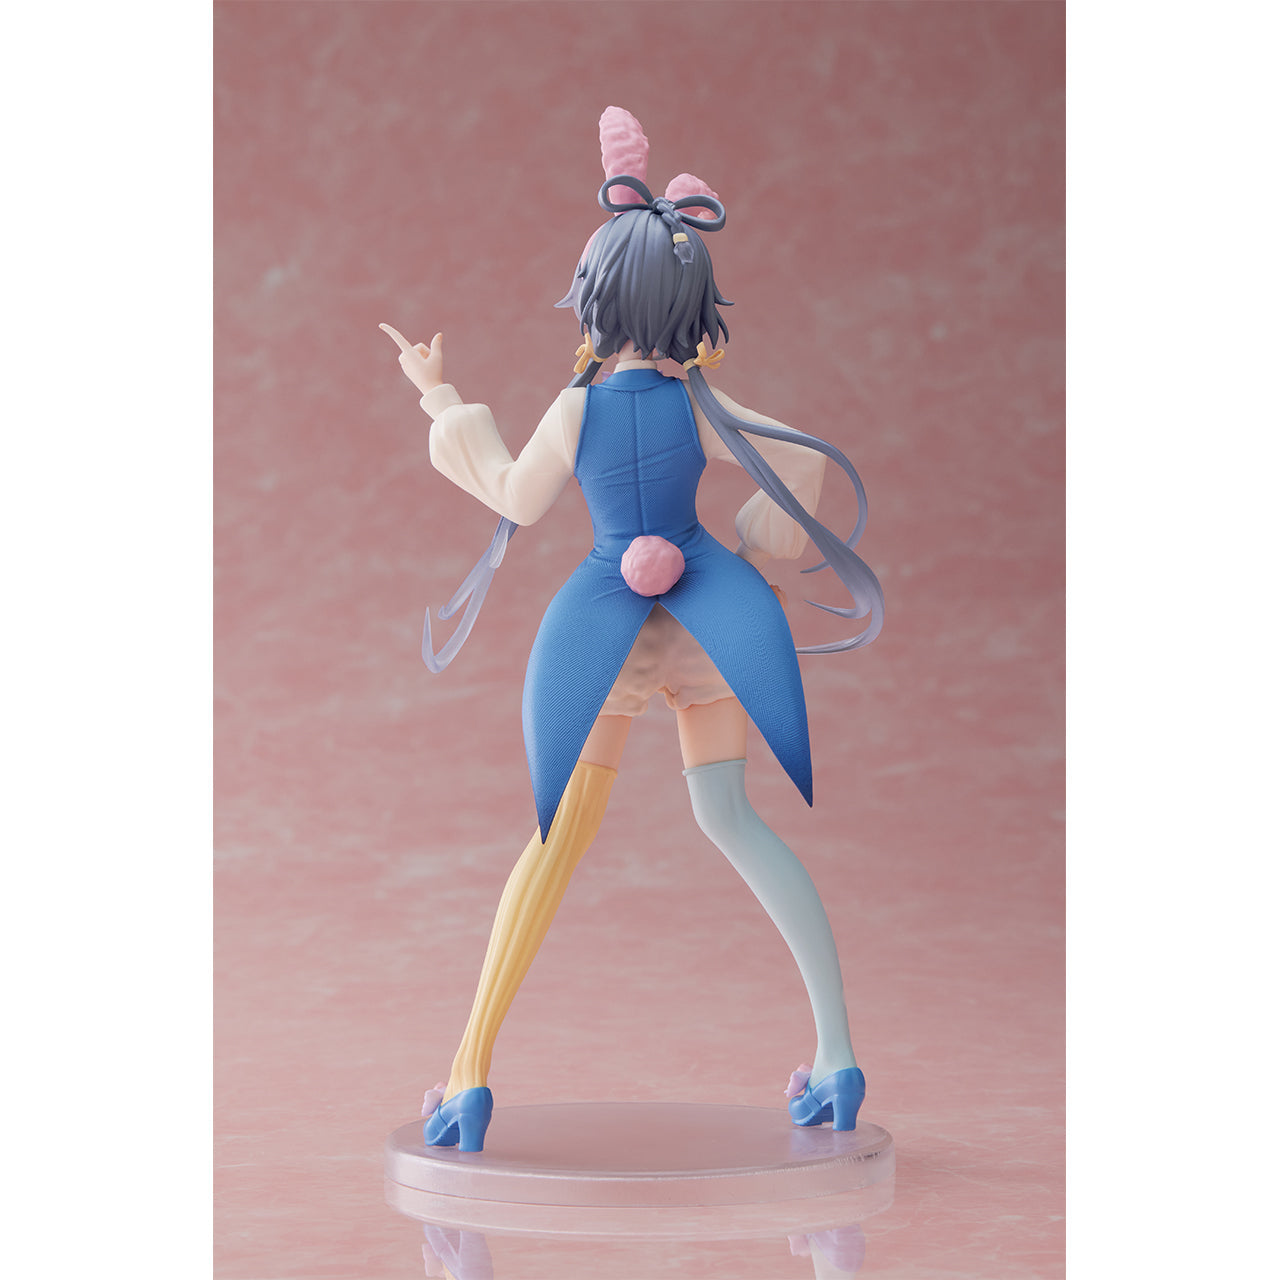 Vsinger - Luo Tianyi - Easter Bunny - Prize Figure